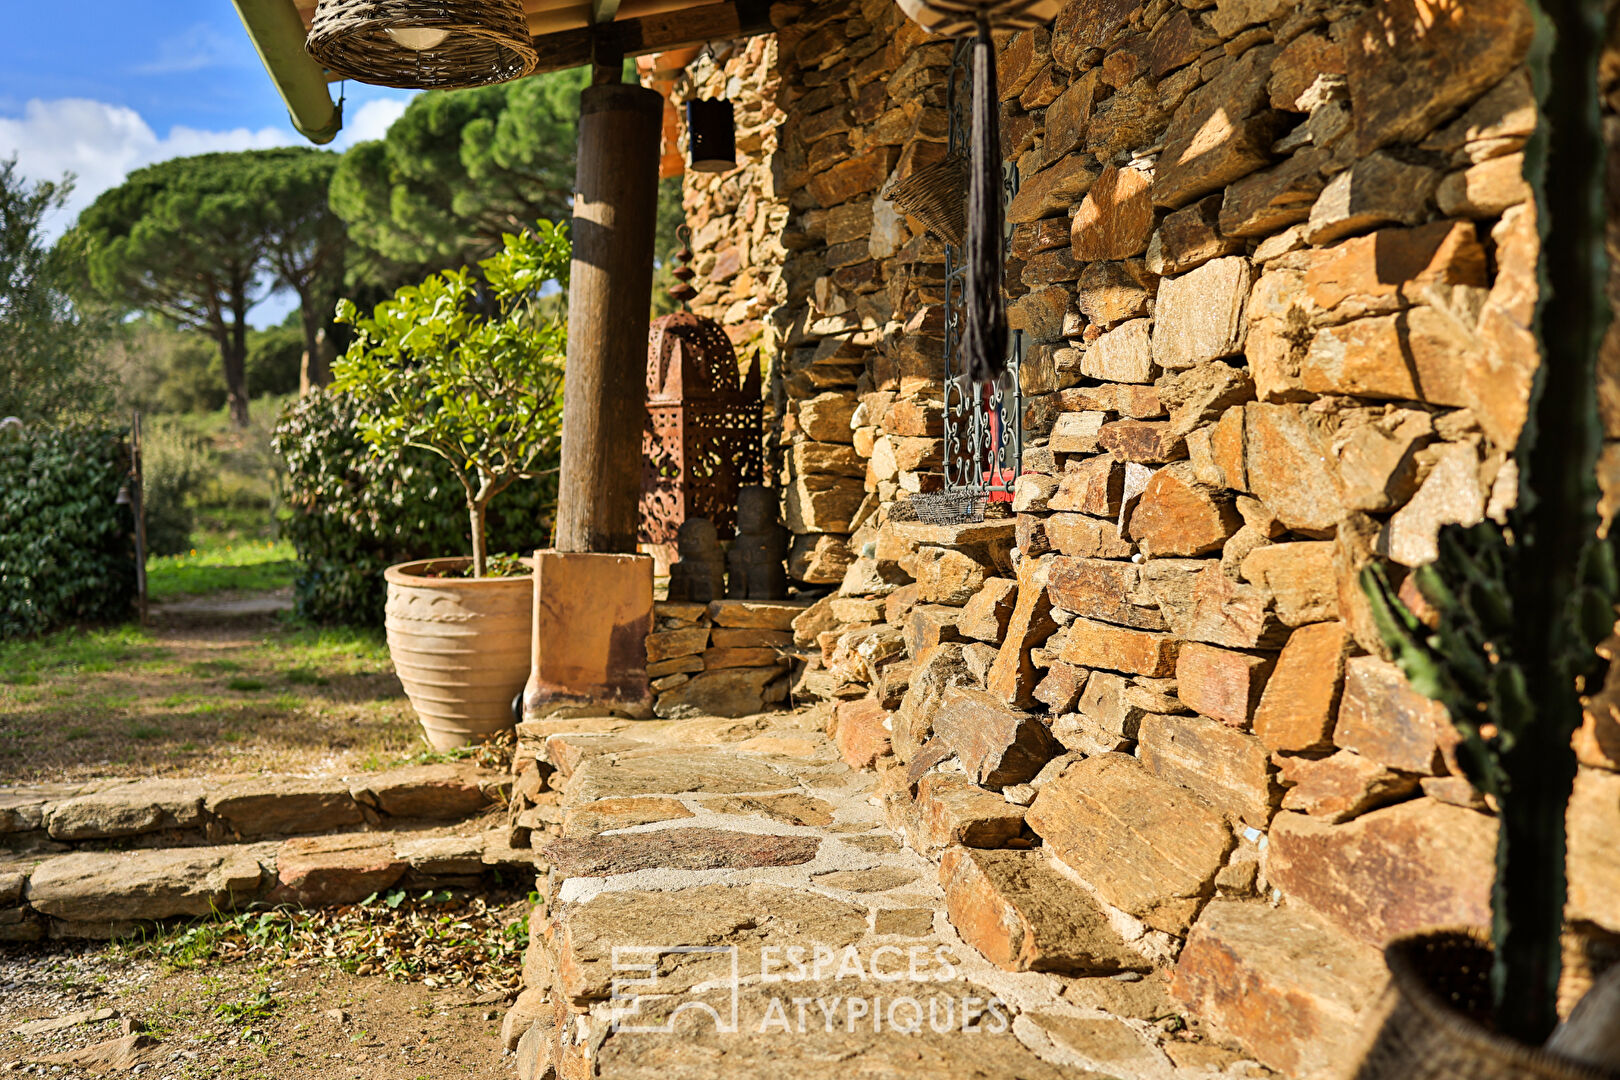 Stunning natural setting for this 17th century farmhouse facing the Mediterranean